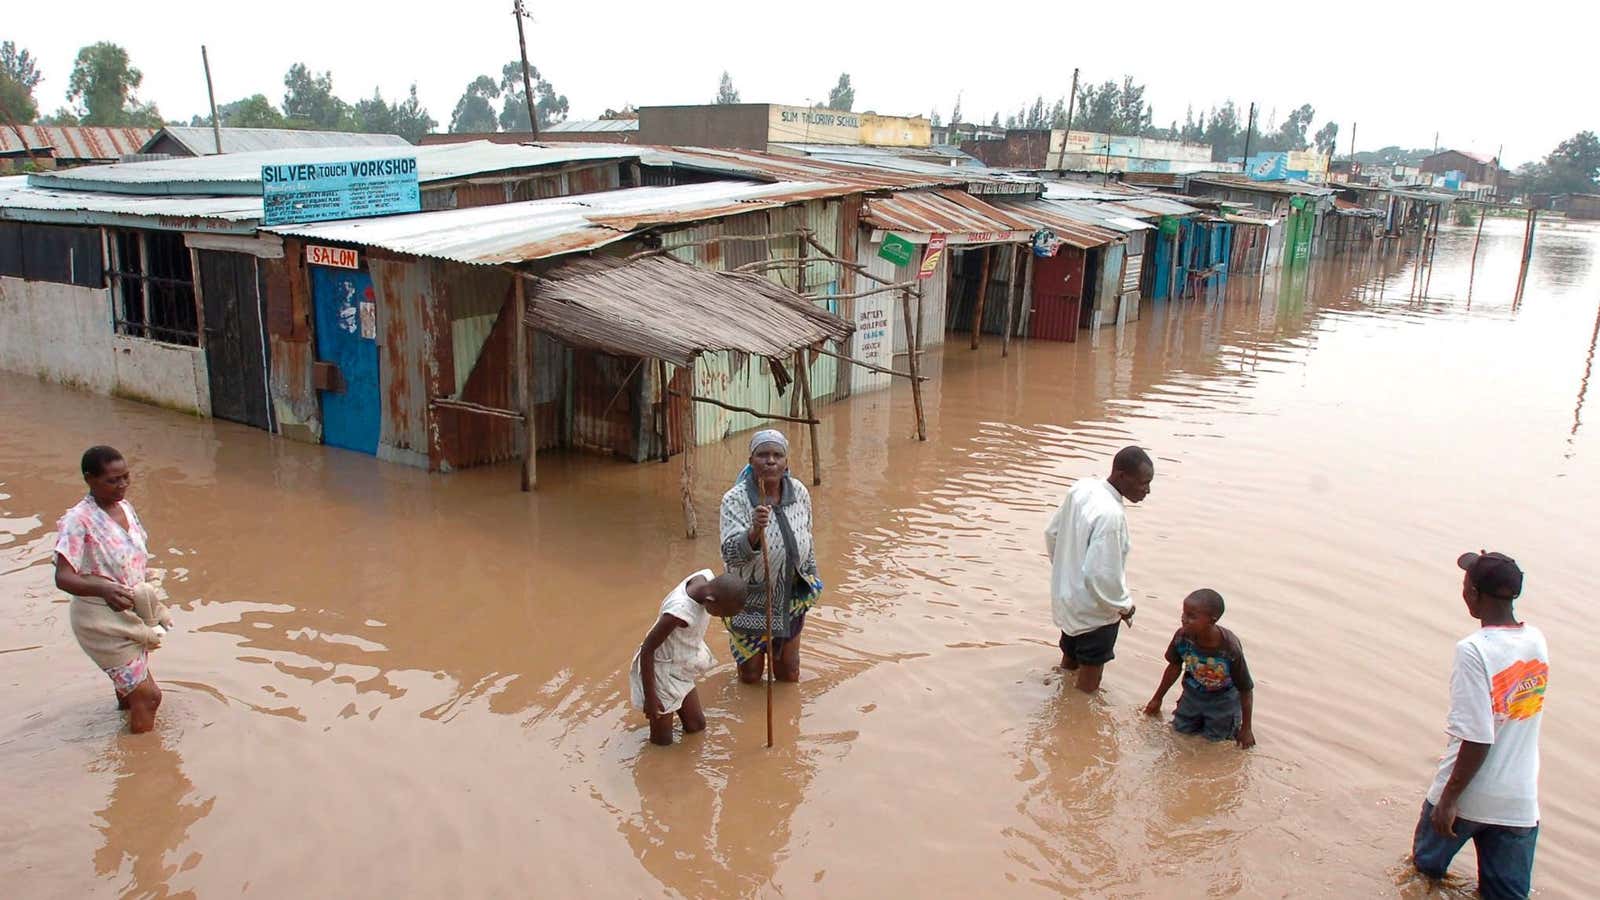 Villagers go about their business in a flooded market center in Kisumu, about 400 kilometers west of the capital Nairobi in Kenya.